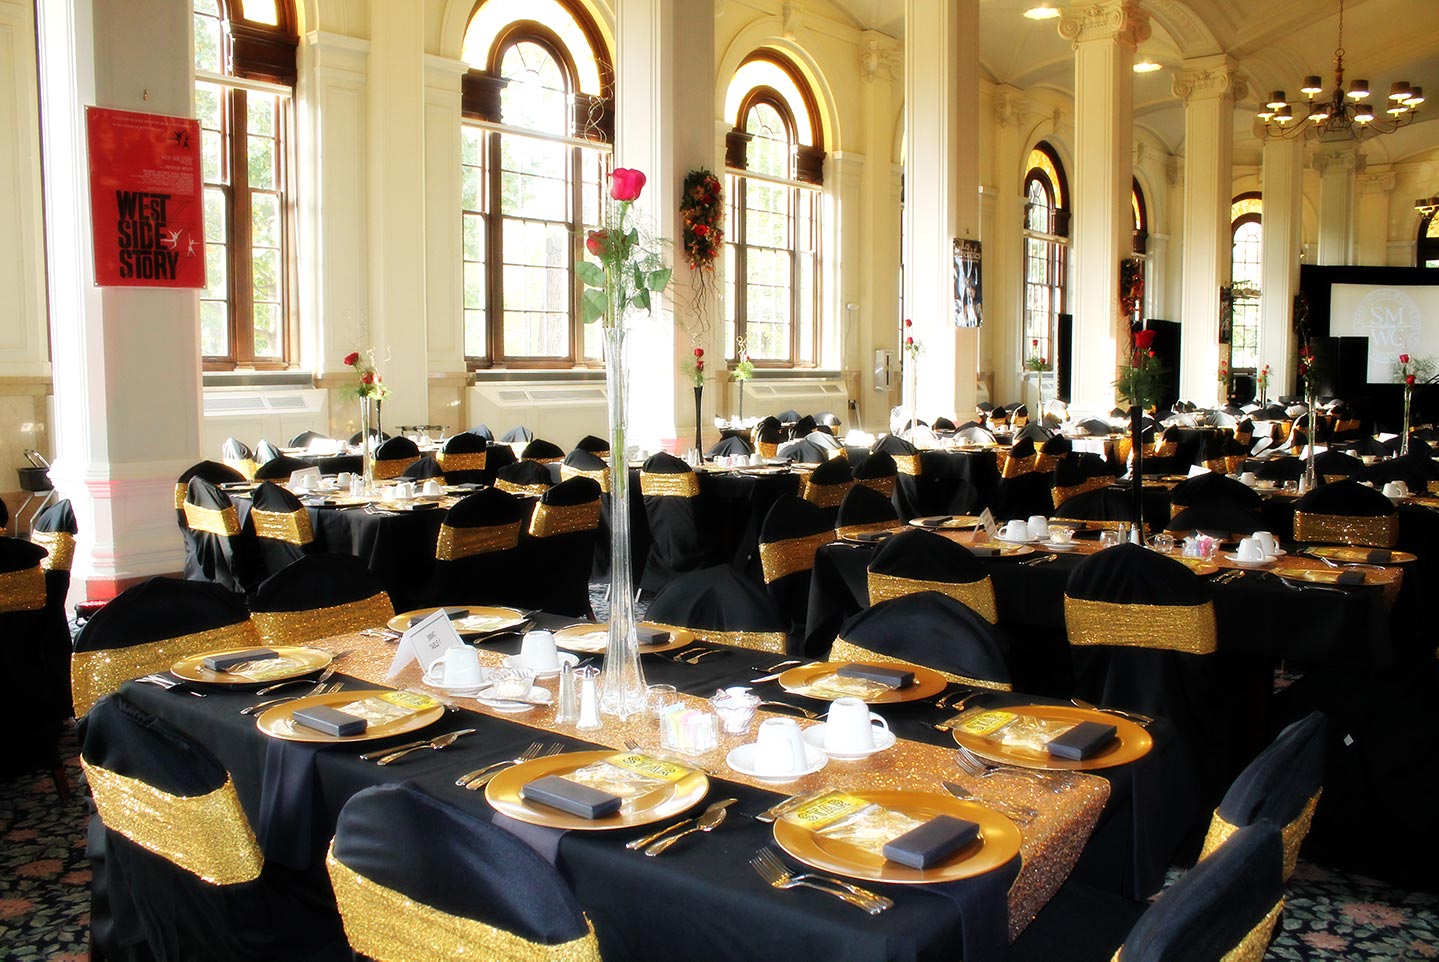 The interior of O’Shaughnessy Dining Hall decorated for an event